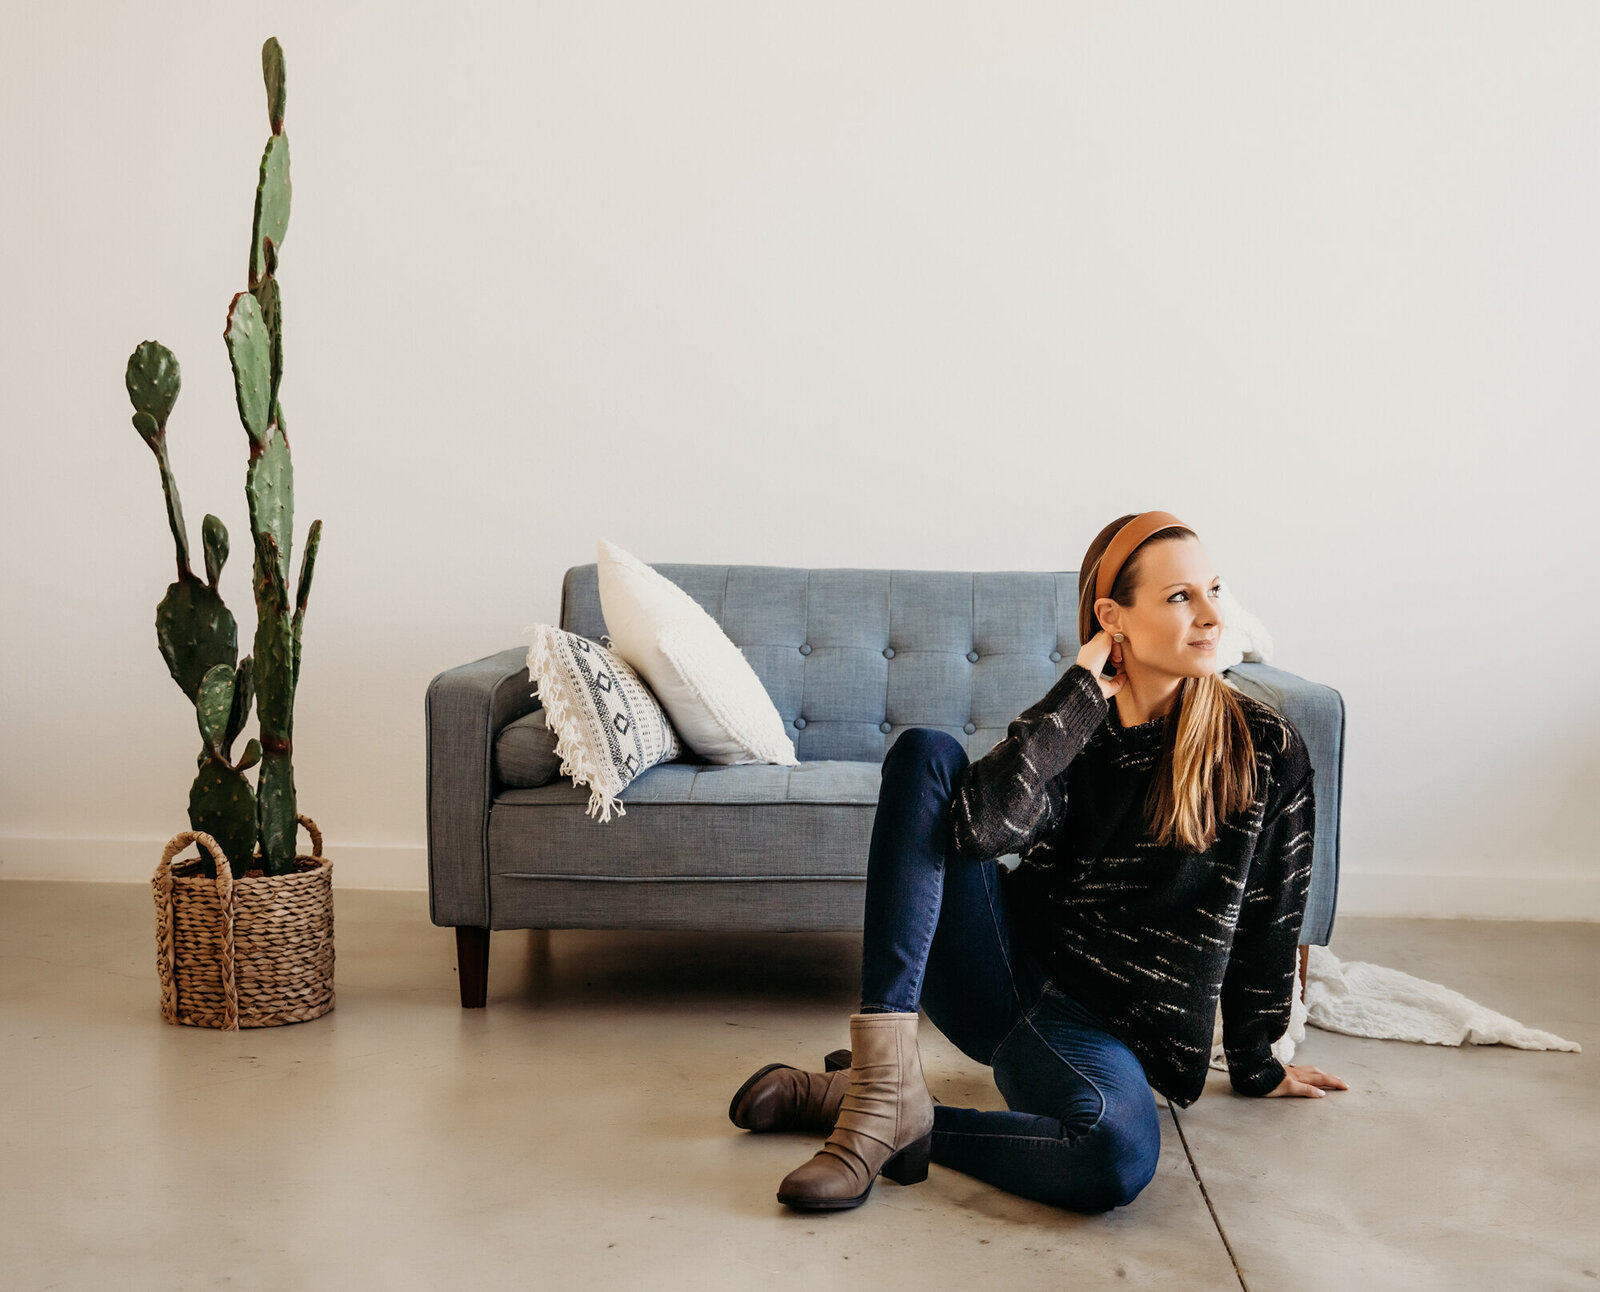 Branding Photographer, a woman sits on the floor beside a couch and cactus plant